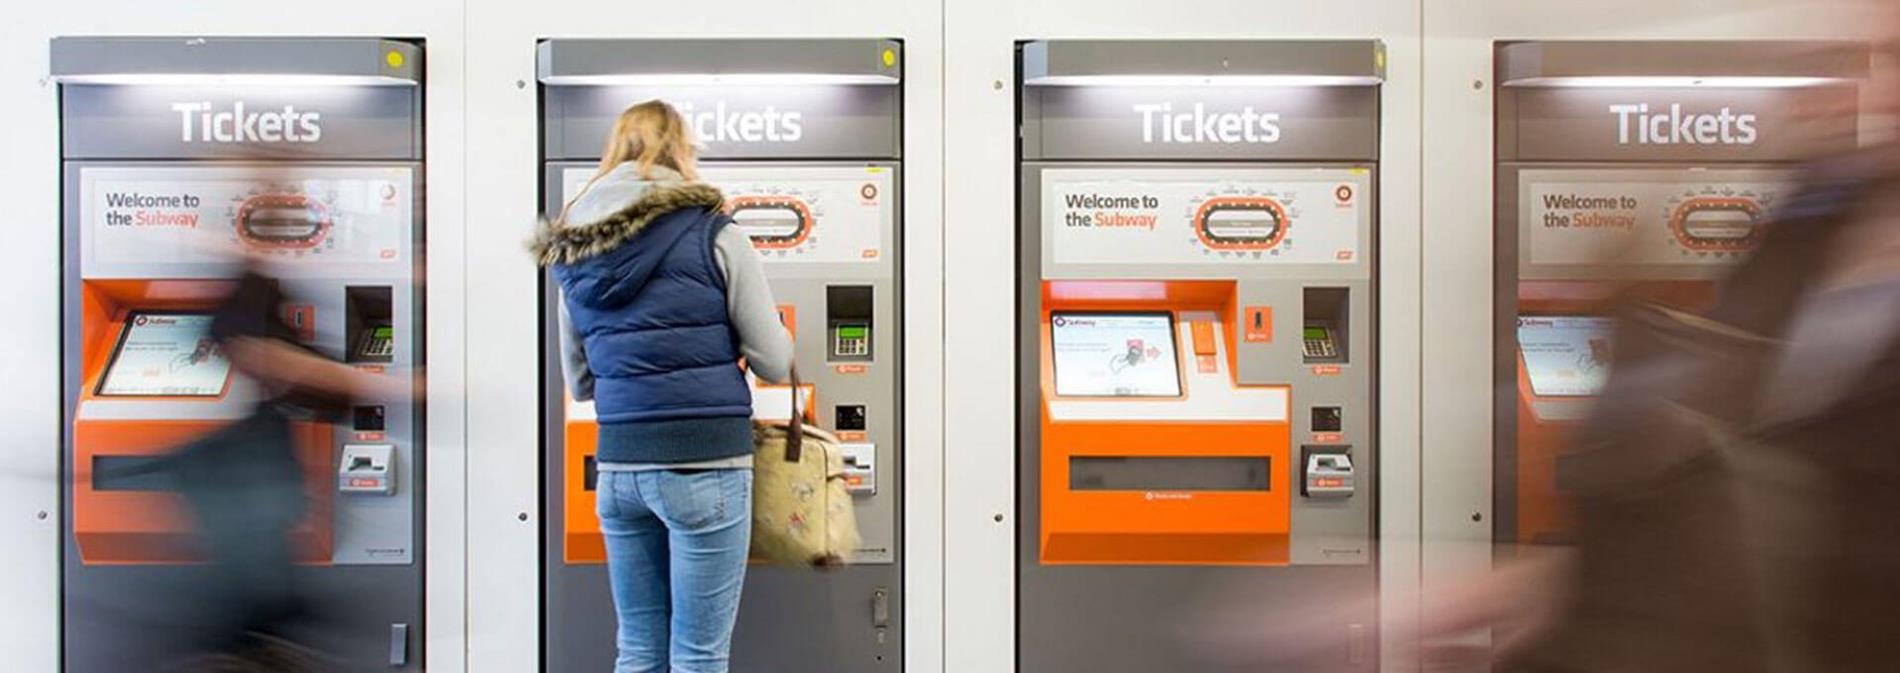 New Ticket Machines Signage And Security Barriers Are Consistent Across All The Modernised Stations 1920X680